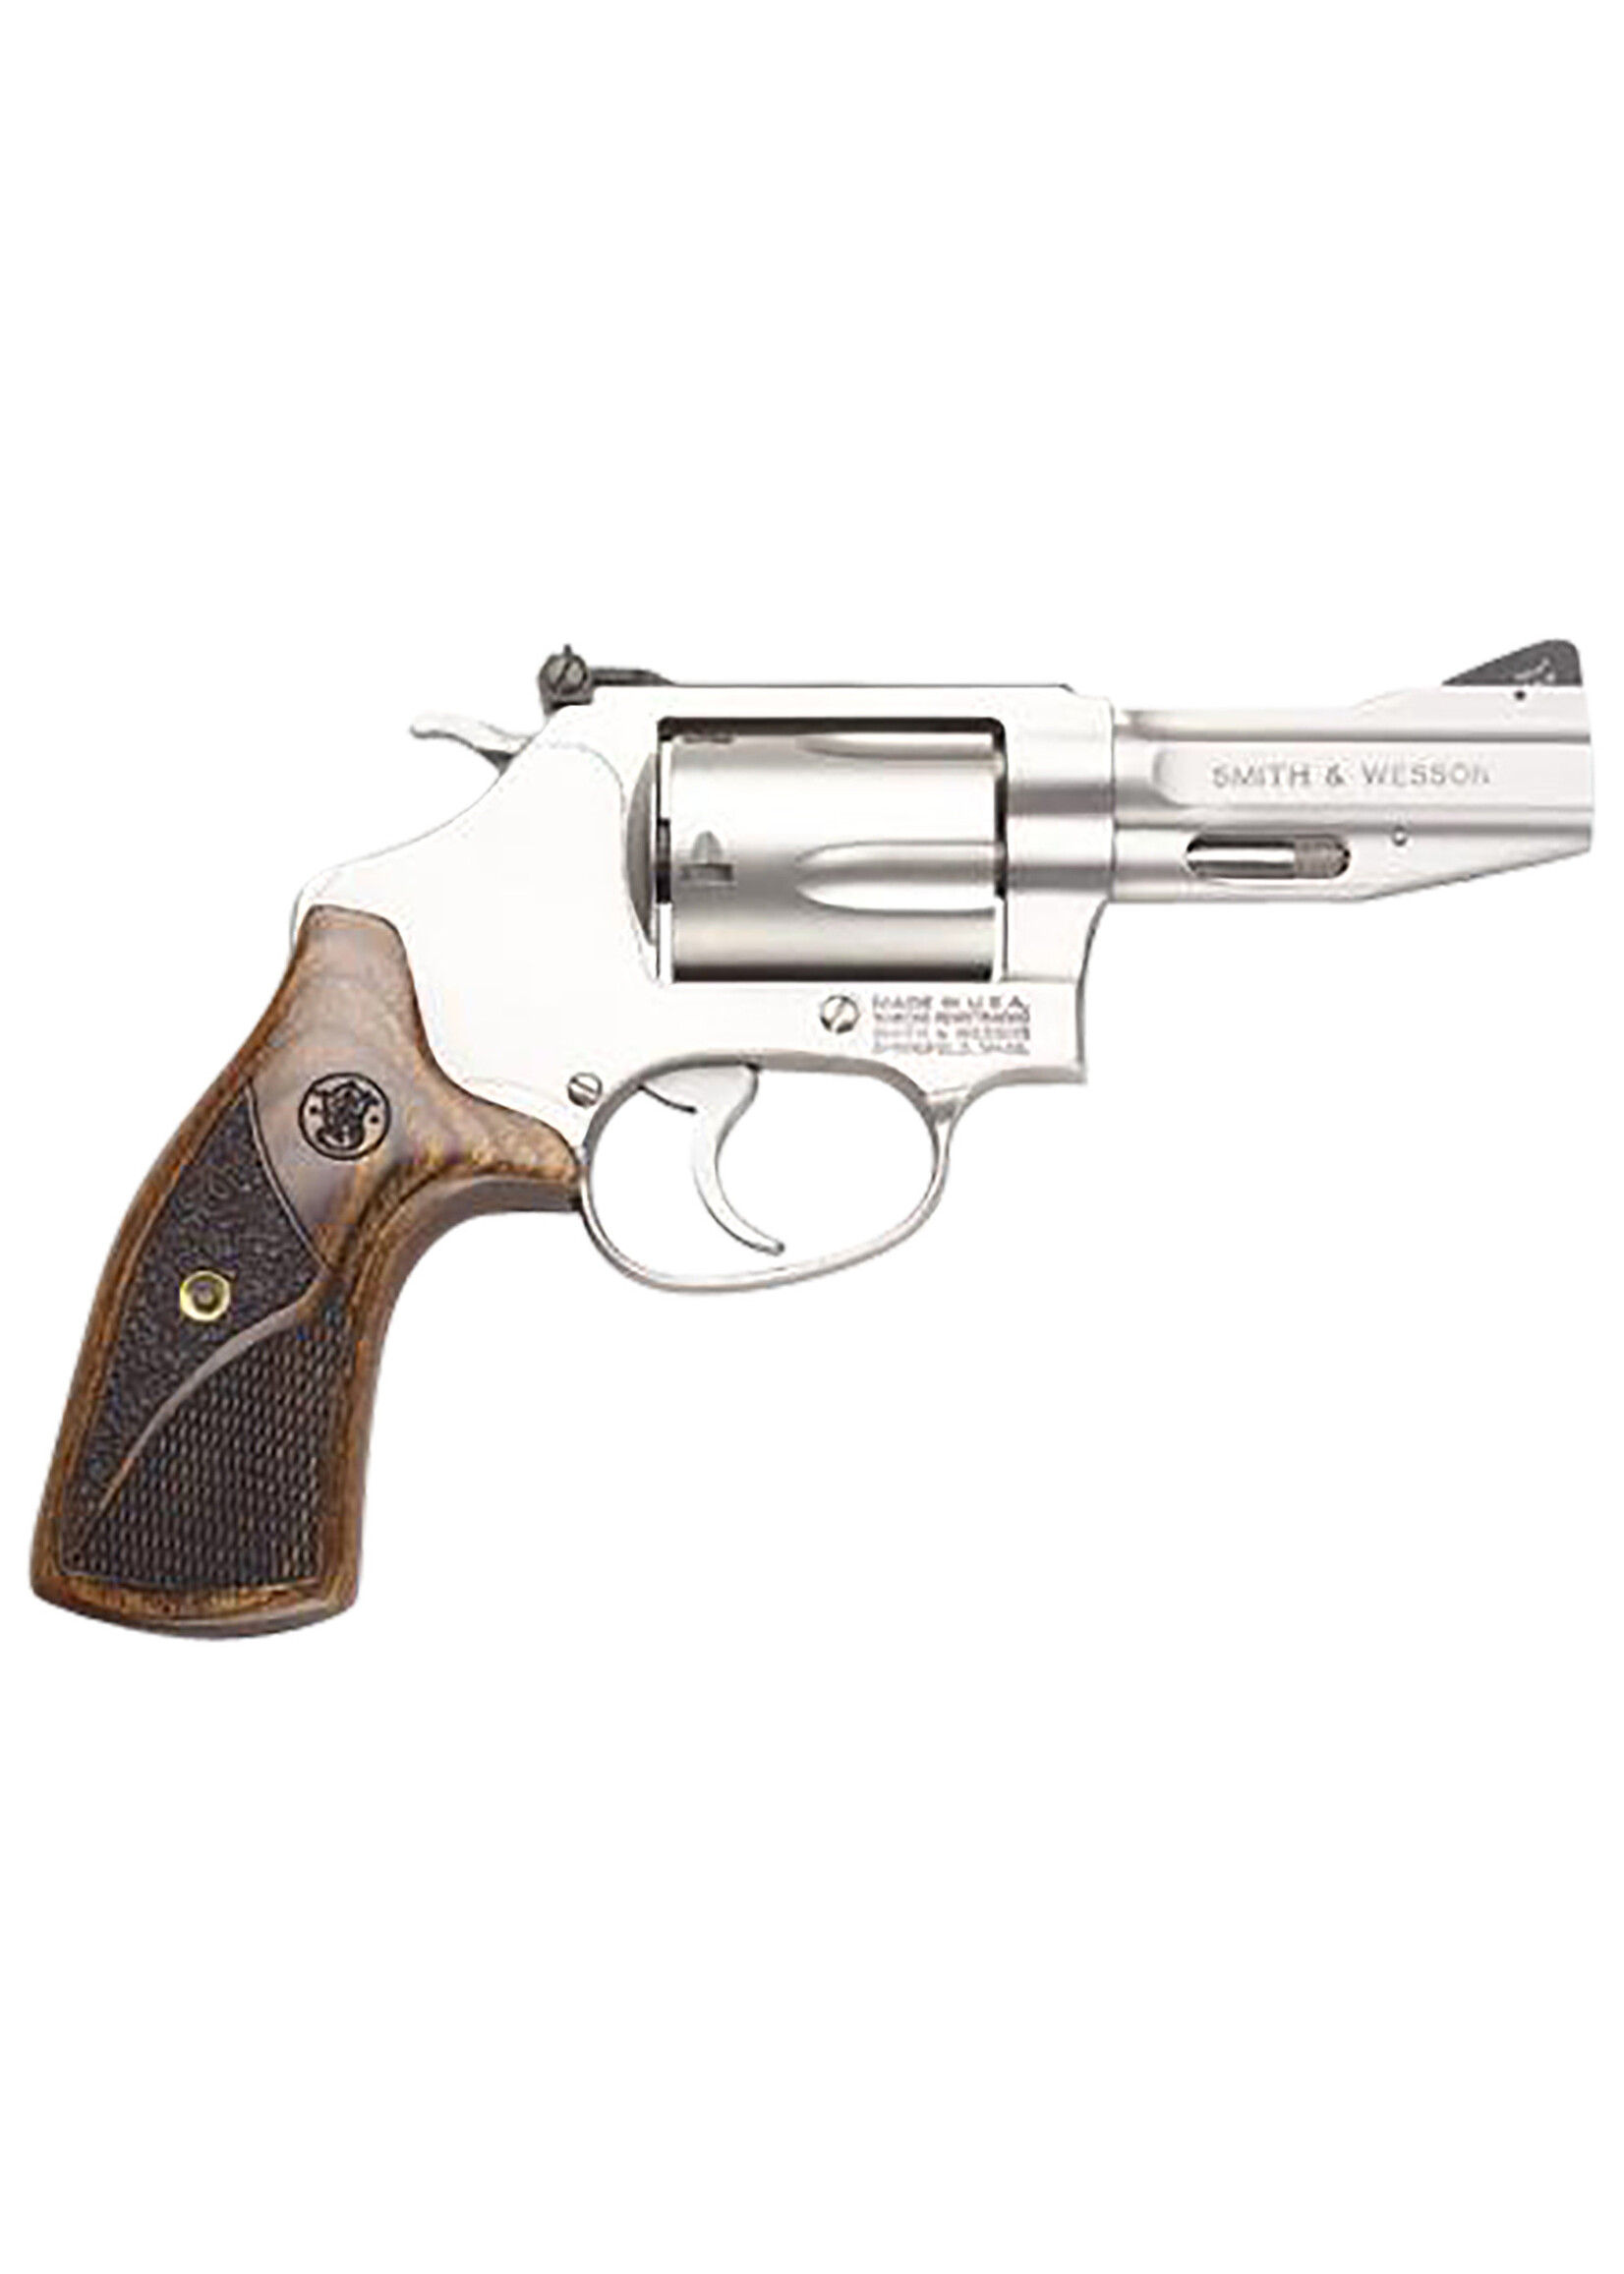 Smith and Wesson (S&W) Smith & Wesson 178013 Model 60 Performance Center Pro 357 Mag or 38 S&W Spl +P 5 Shot 3" Stainless Steel/Cylinder, Satin Stainless Steel J-Frame, Ergonomic Wood Grip, Internal Lock